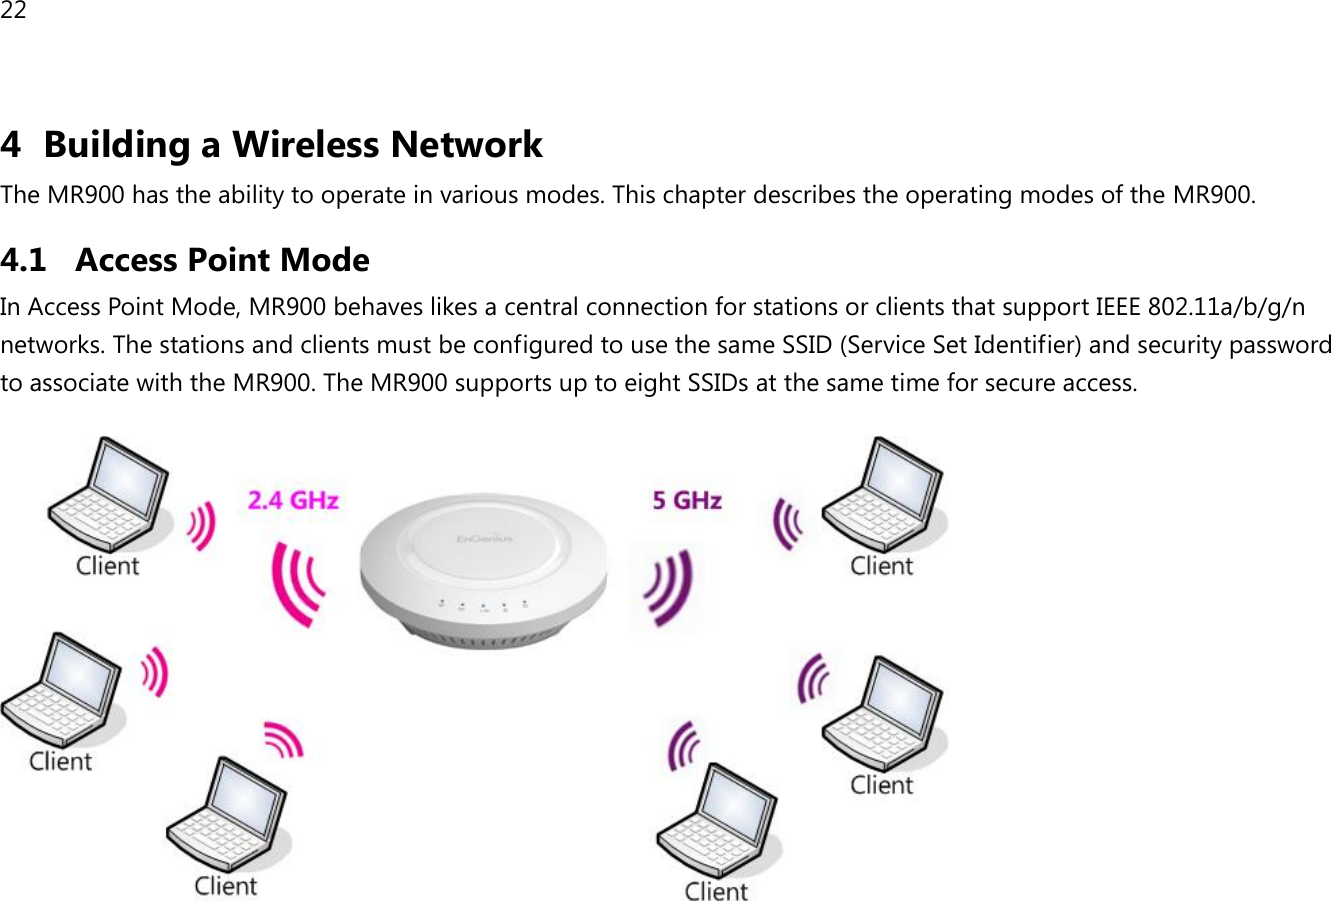 22 4 Building a Wireless Network The MR900 has the ability to operate in various modes. This chapter describes the operating modes of the MR900. 4.1 Access Point Mode In Access Point Mode, MR900 behaves likes a central connection for stations or clients that support IEEE 802.11a/b/g/n networks. The stations and clients must be configured to use the same SSID (Service Set Identifier) and security password to associate with the MR900. The MR900 supports up to eight SSIDs at the same time for secure access.    